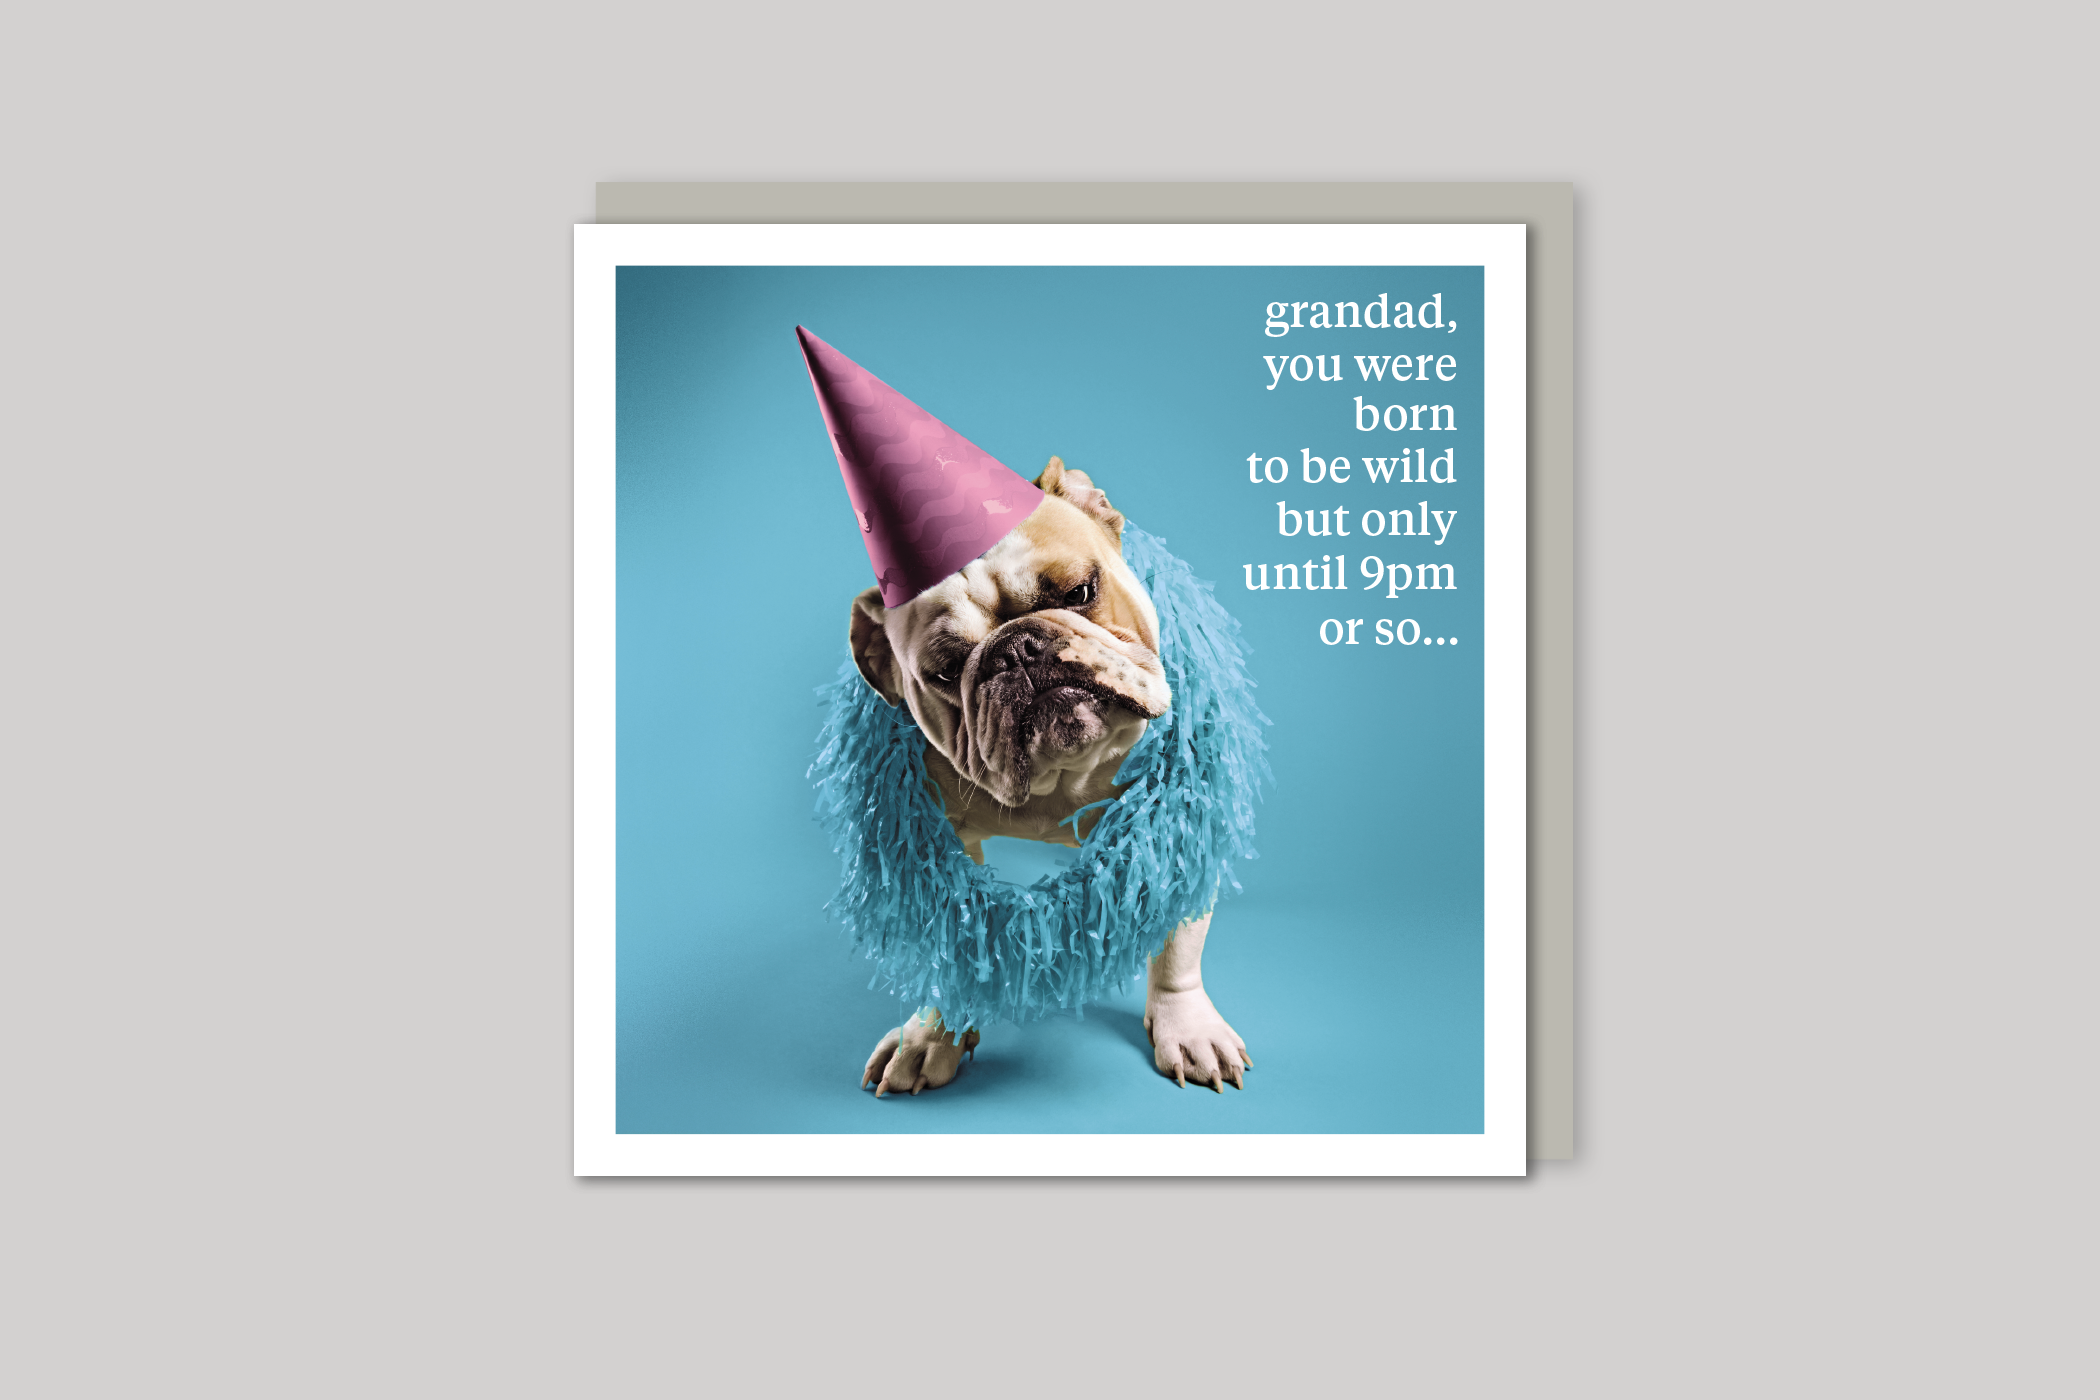 Born to be Wild grandad card quirky animal portrait from Curious World range of greeting cards by Icon, back page.